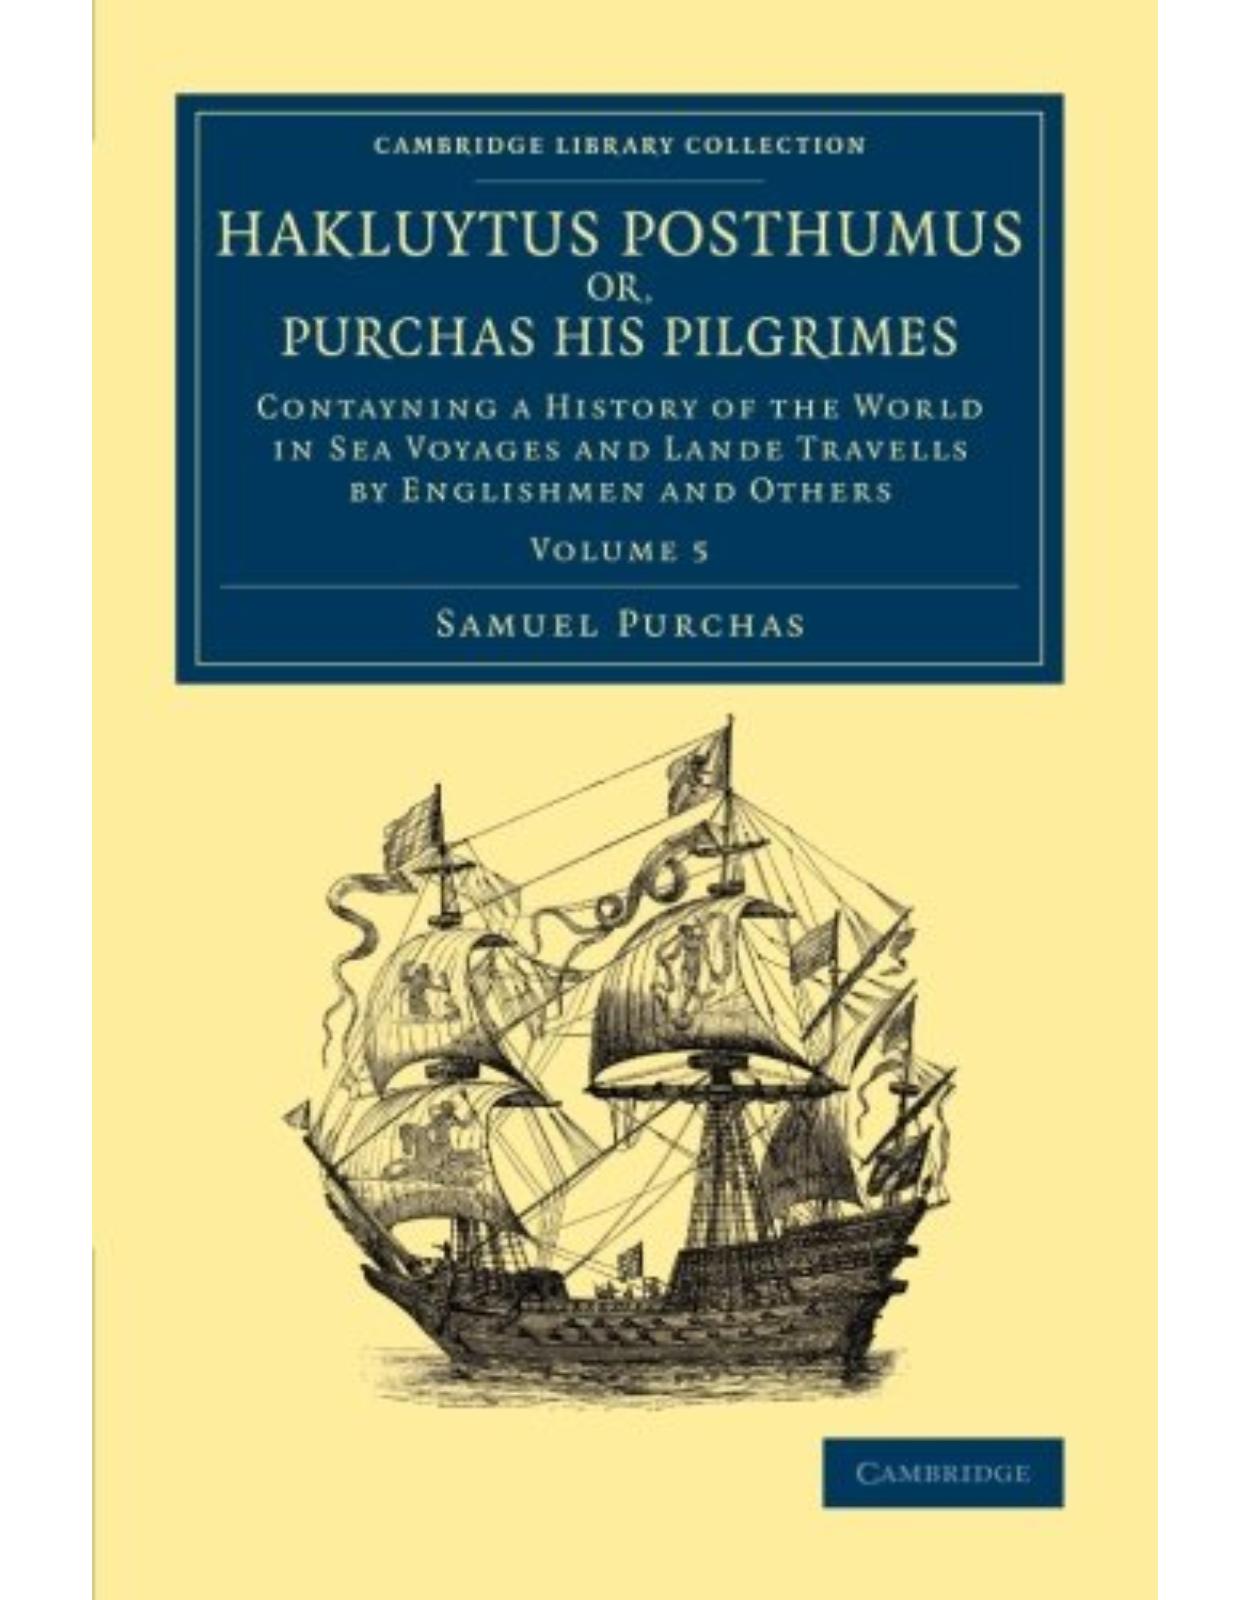 Hakluytus Posthumus or, Purchas his Pilgrimes: Contayning a History of the World in Sea Voyages and Lande Travells by Englishmen and Others (Volume 5)